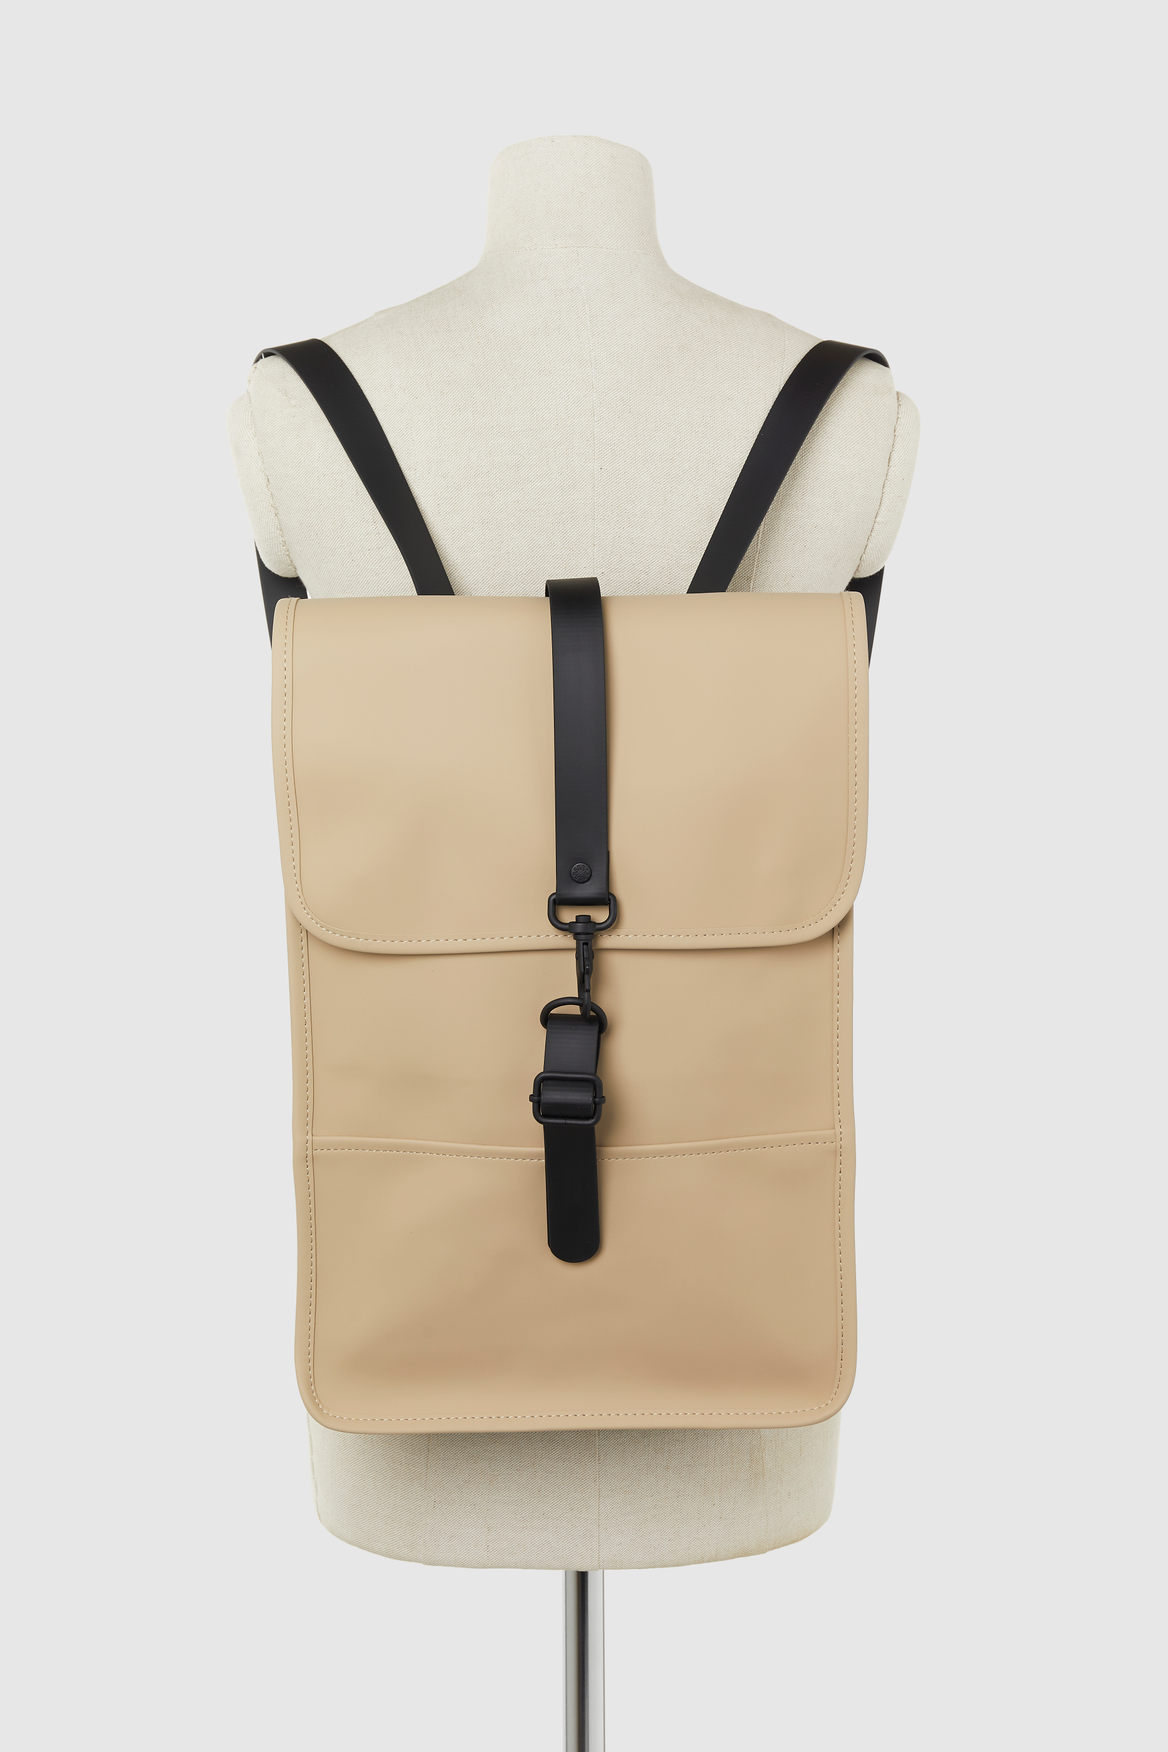 Rains Backpack Taupe - Bags & Cases - Paraphernalia Athens